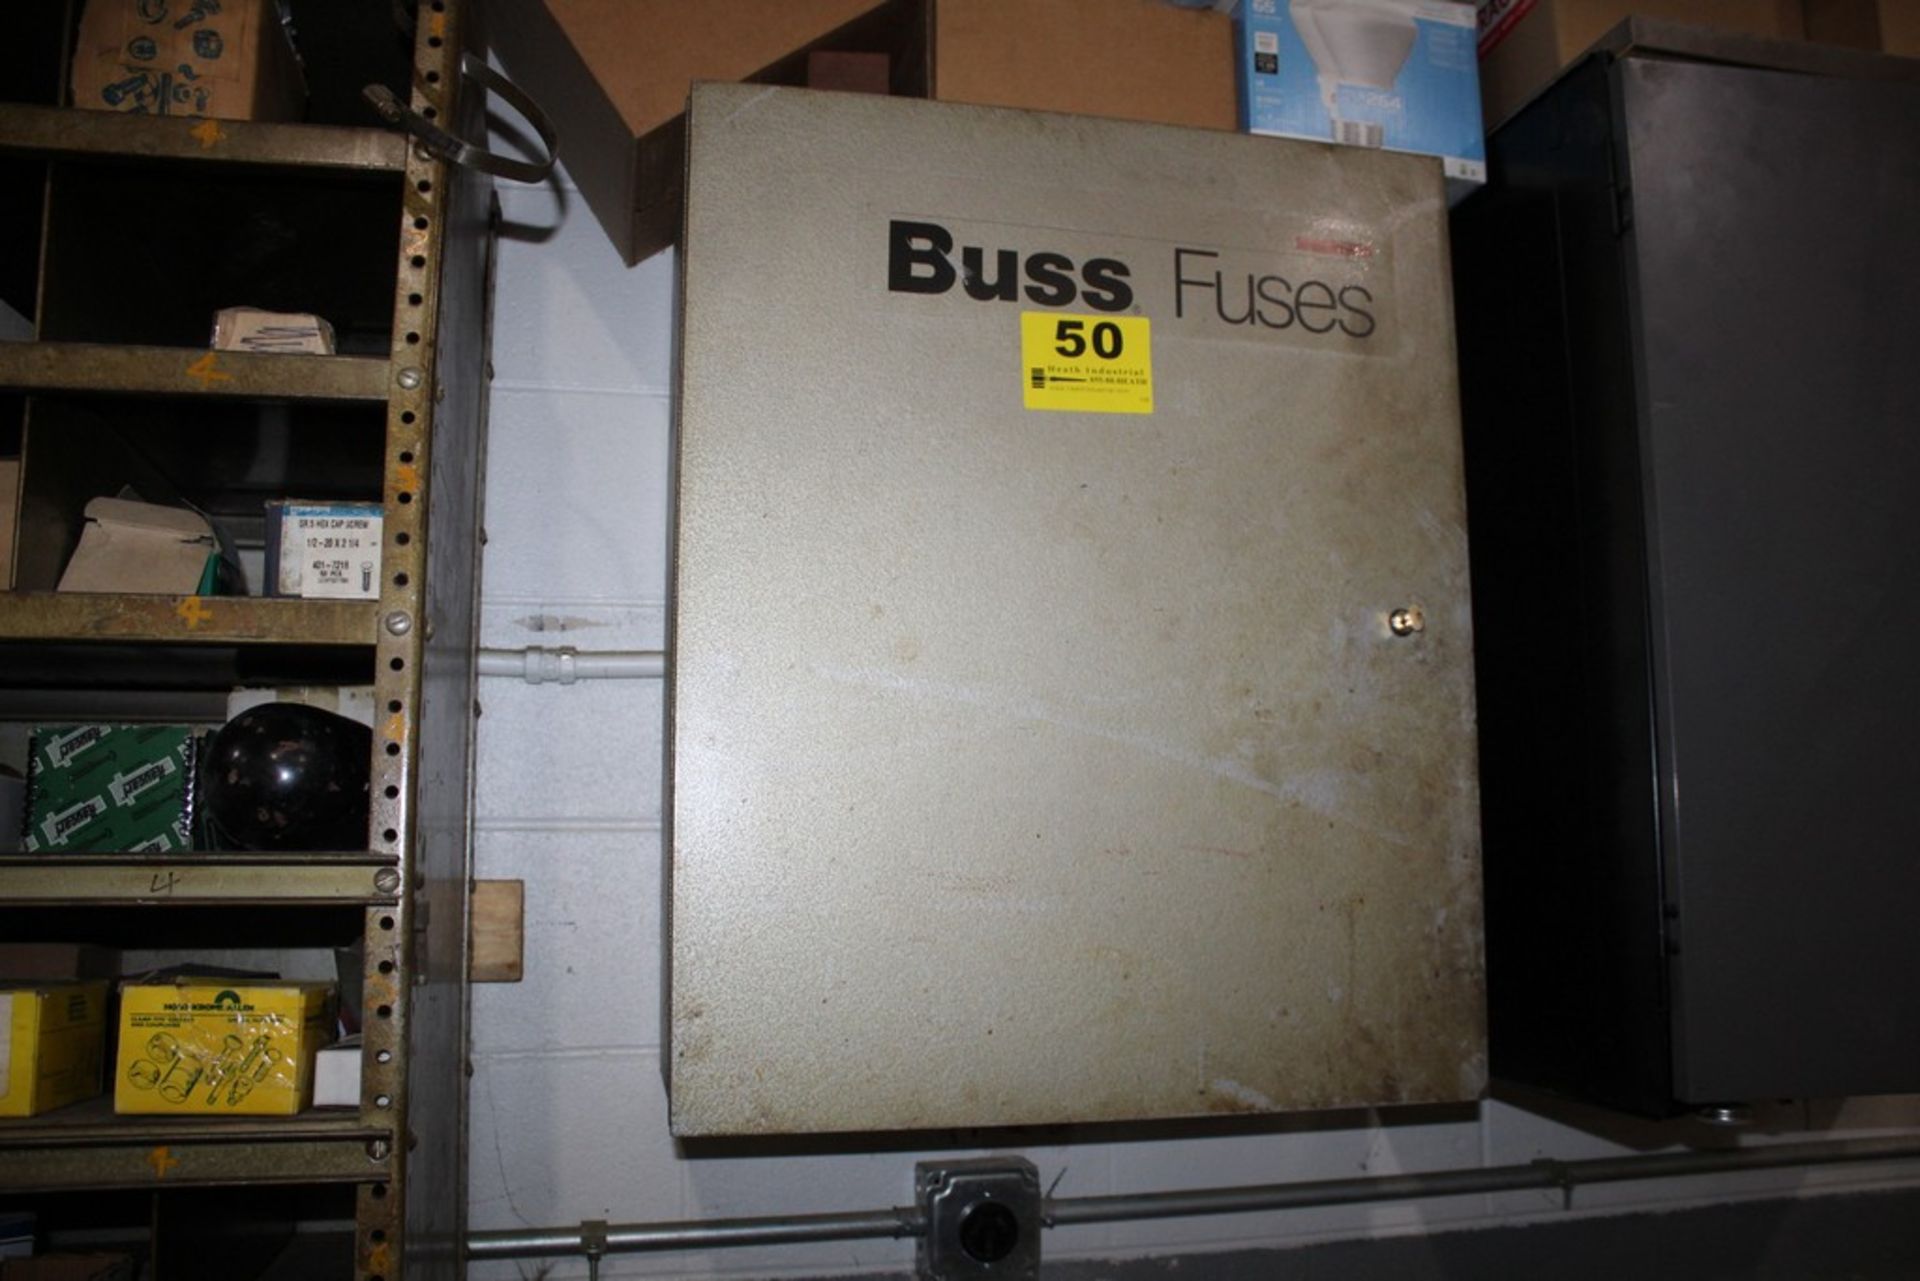 MCGRAW BUSS FUSE CABINET WITH KEY 25" X 12" X 30" LOADING FEE: $35.00 INCLUDES INCLUDES REMOVAL FROM